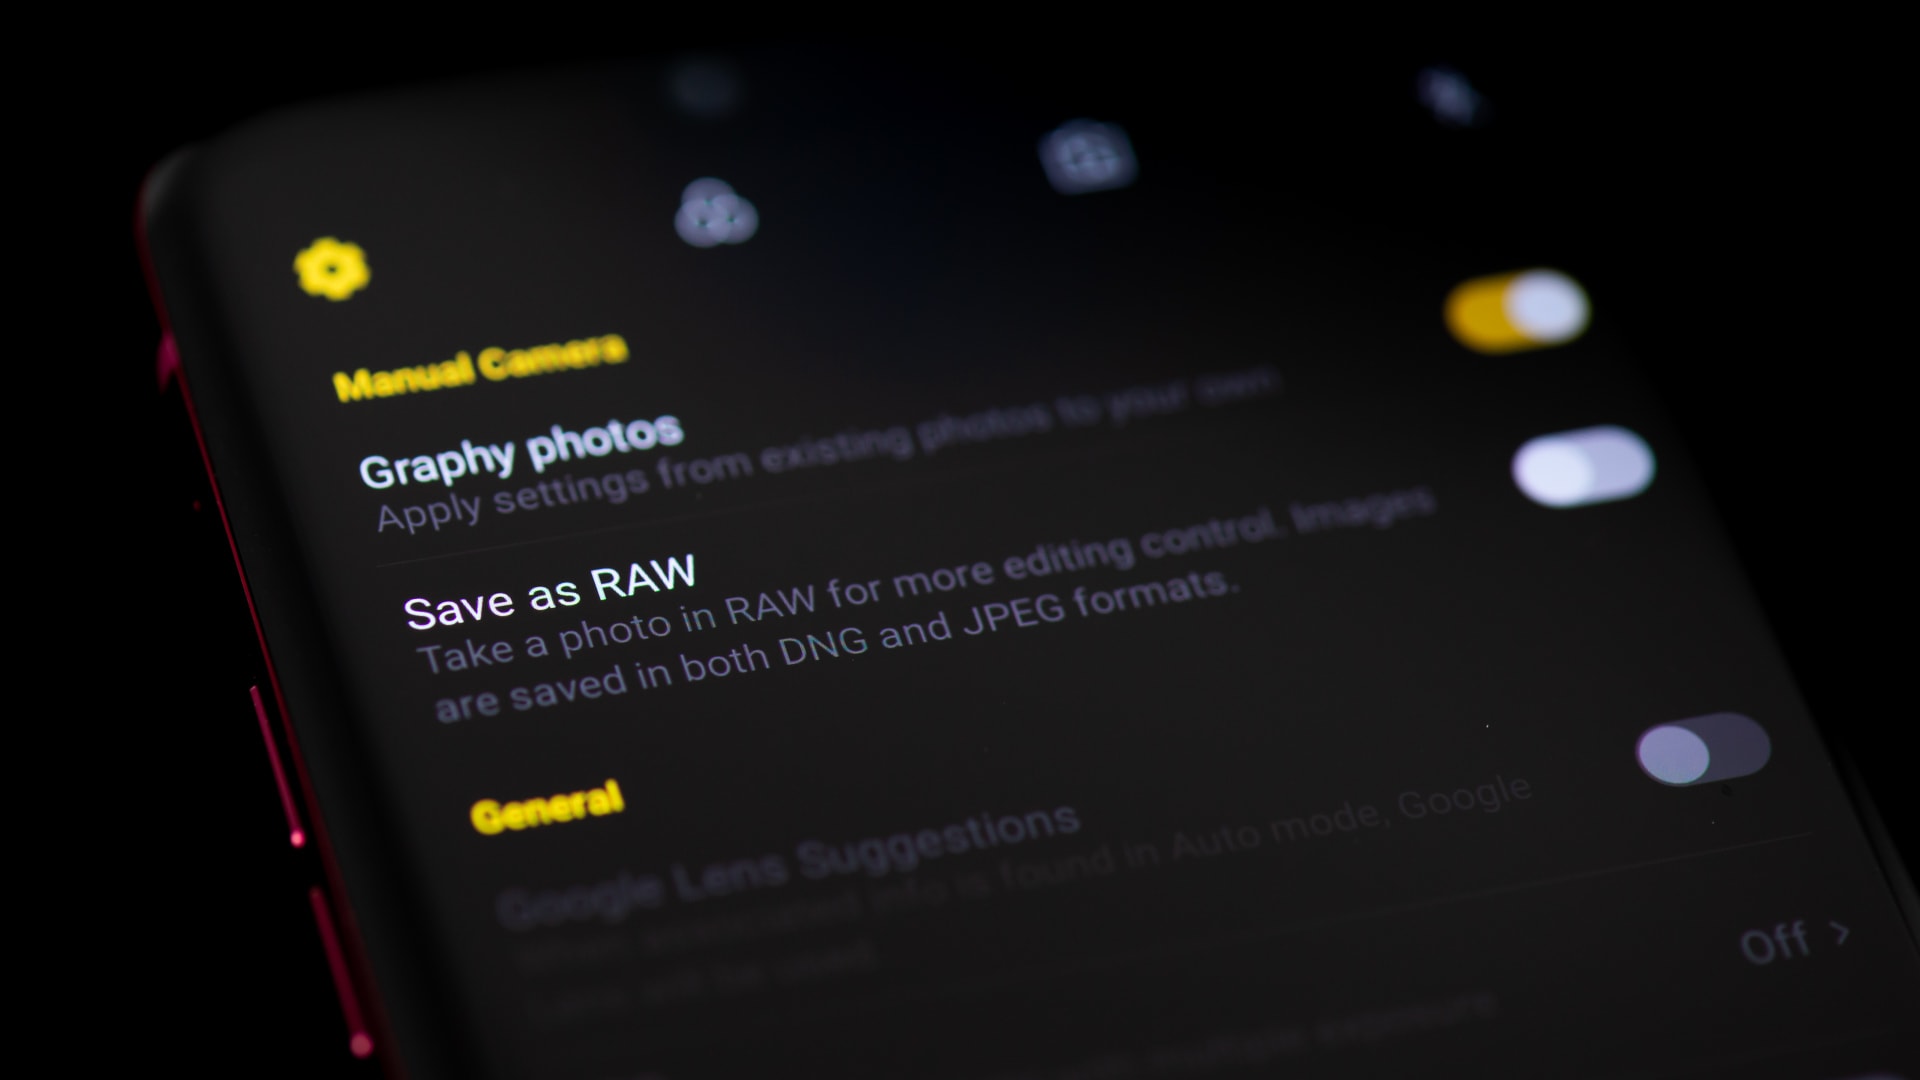 RAW support on smartphone camera